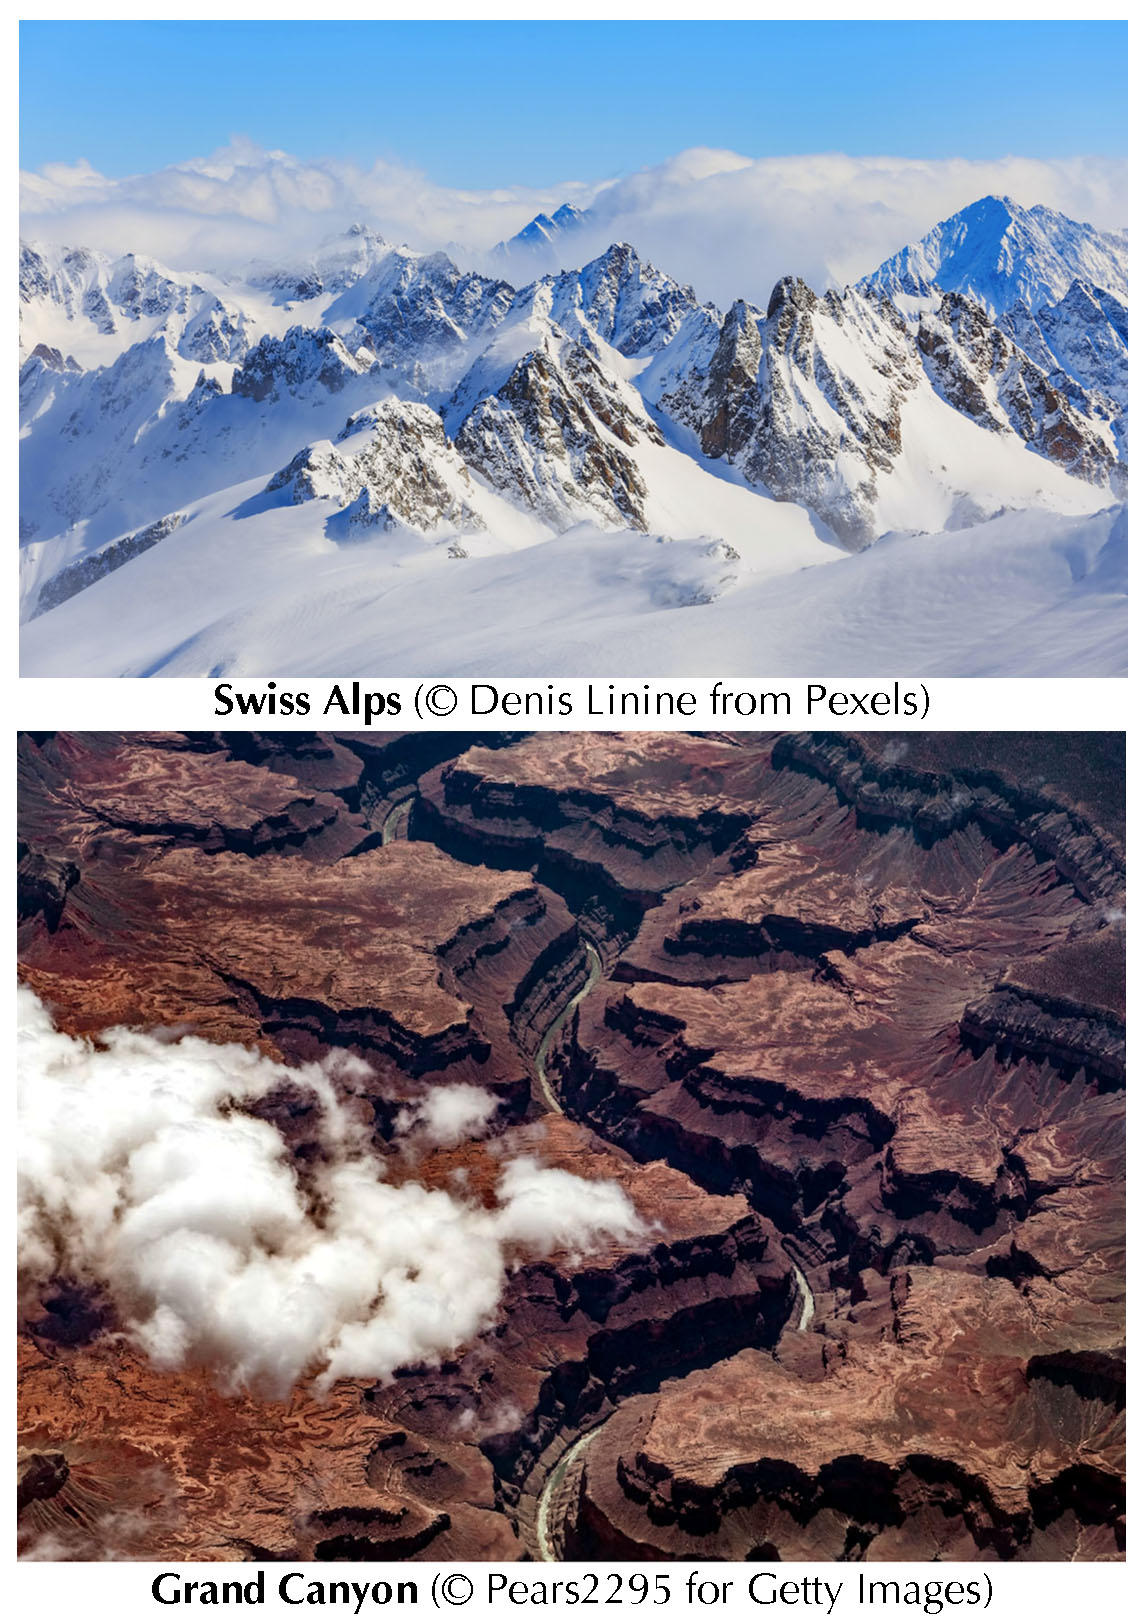 Photo of Swiss Alps © Denis Linine from Pexels and photo of Grand Canyon © Pears2295 for Getty Images